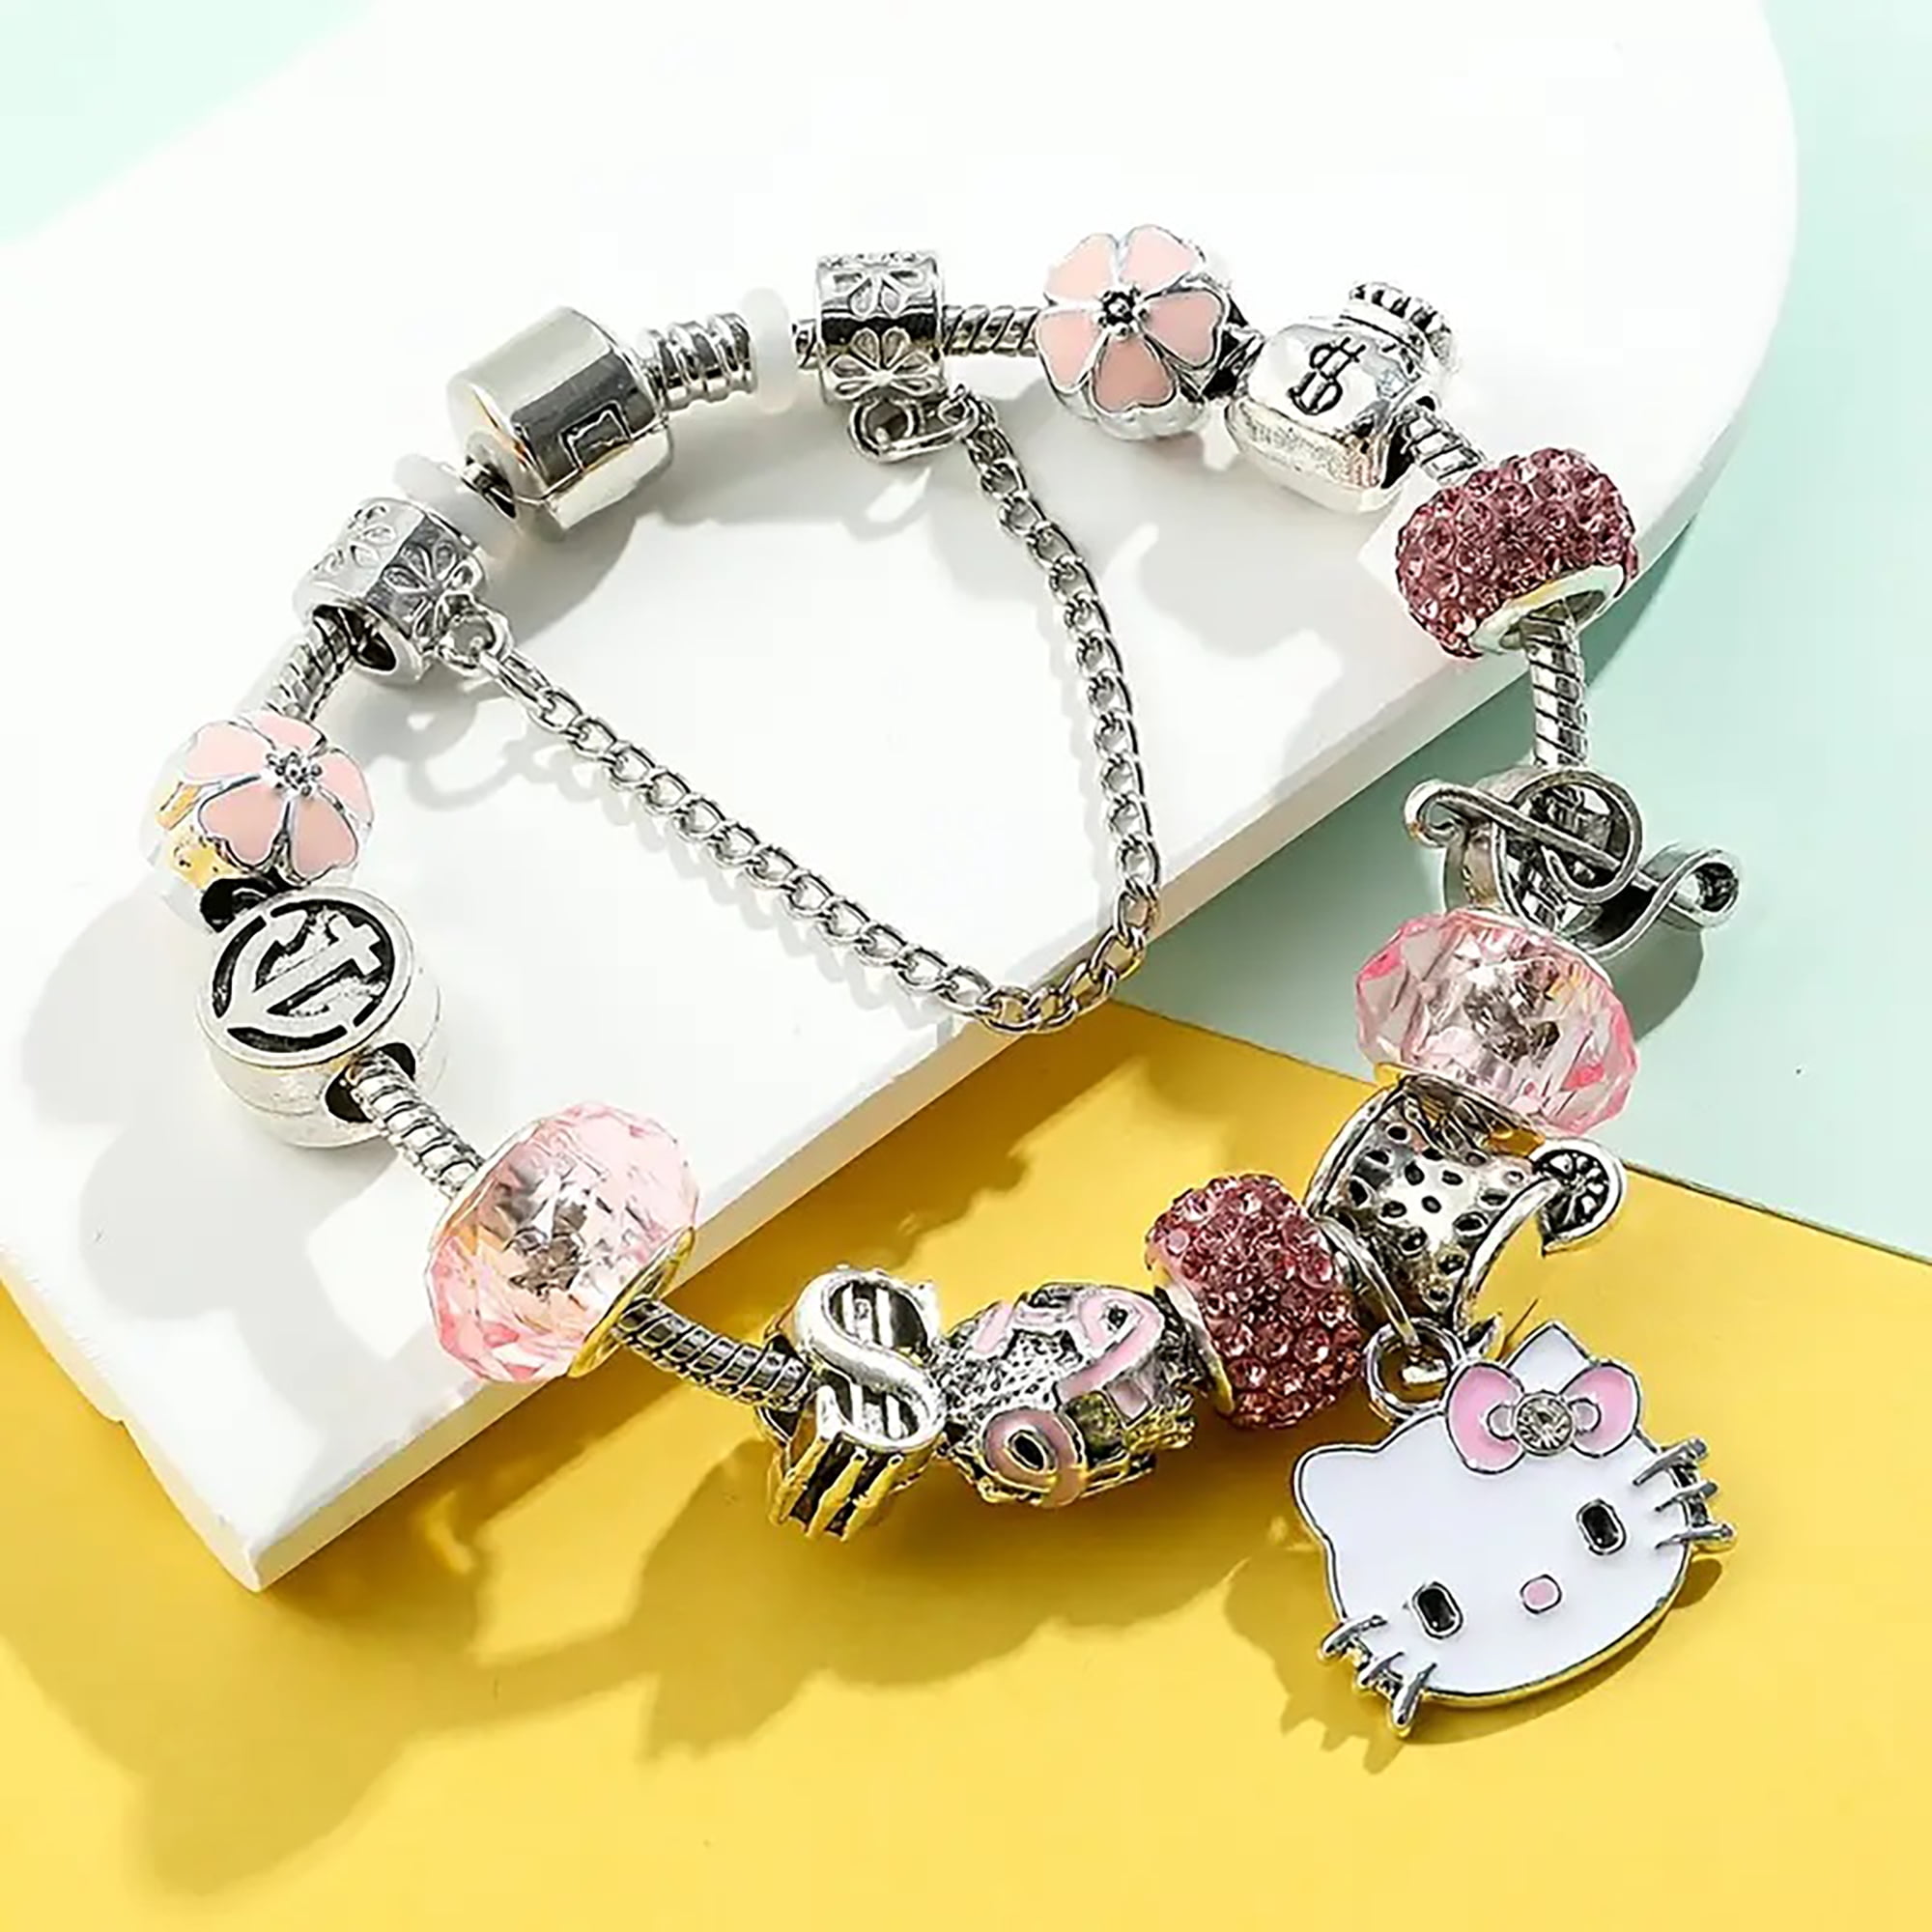 VINCHIC Hello Kitty Bracelet Chain Cuff Jewelry Charms for